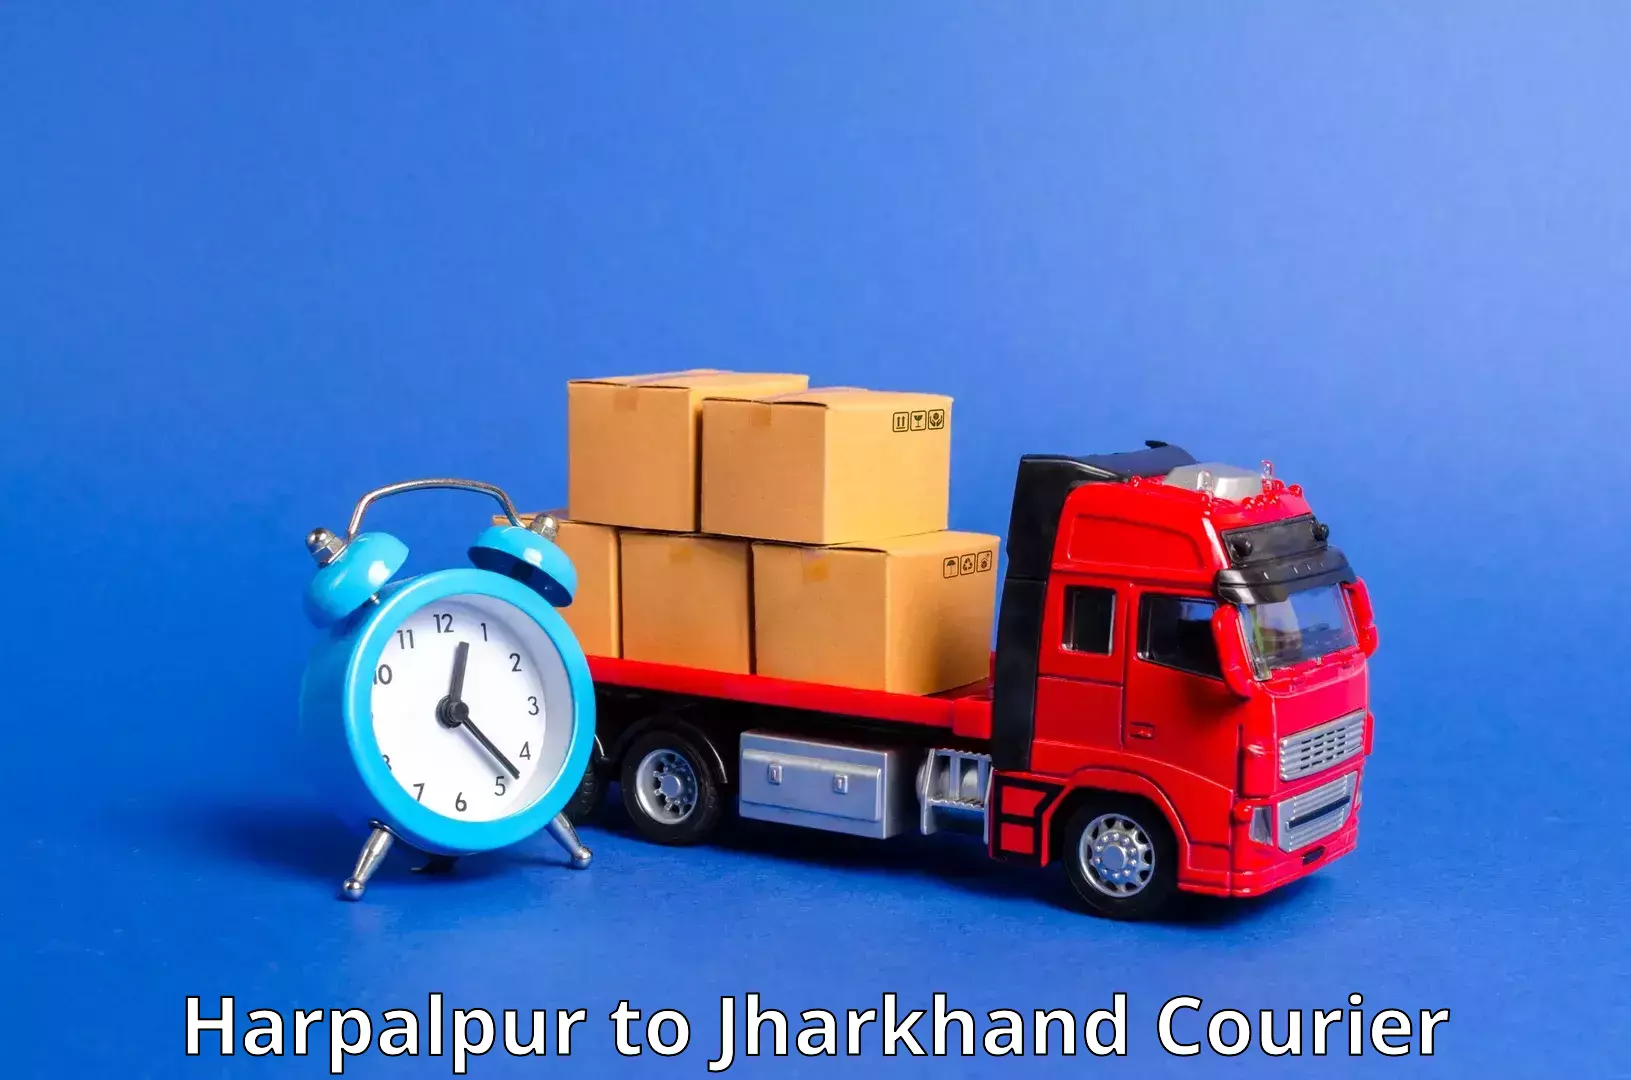 Budget-friendly shipping Harpalpur to Jamshedpur